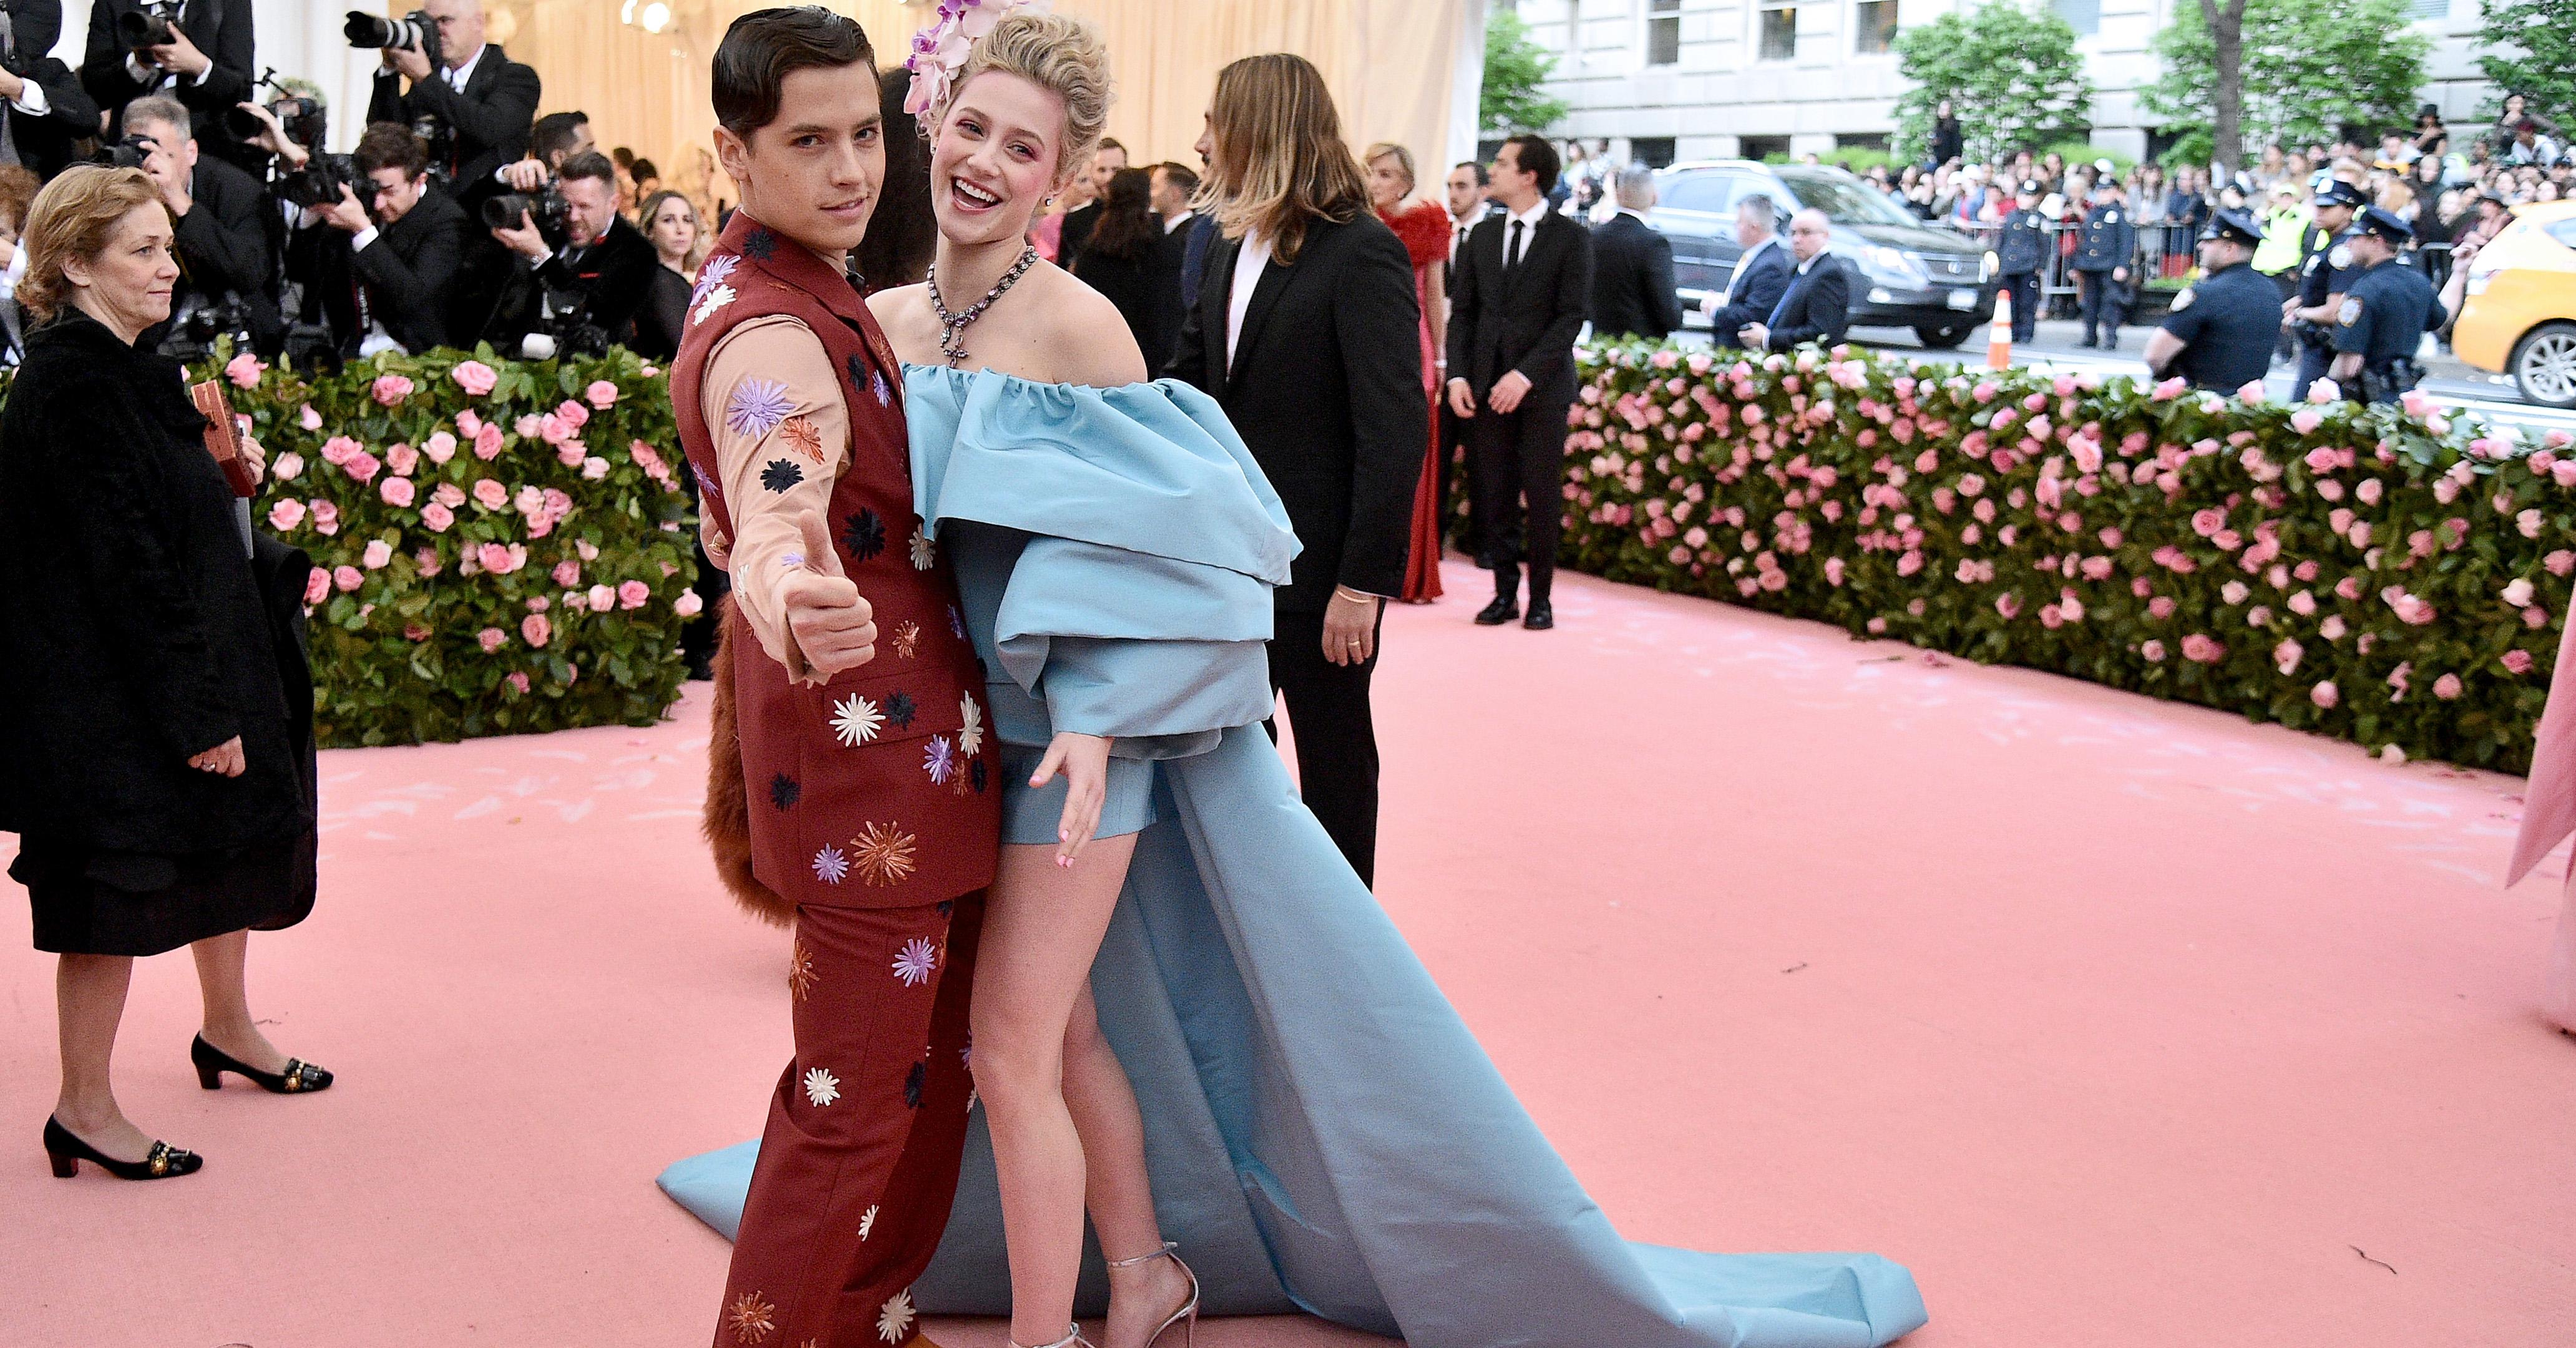 Cole Sprouse and Lili Reinhart attend the Met Gala.